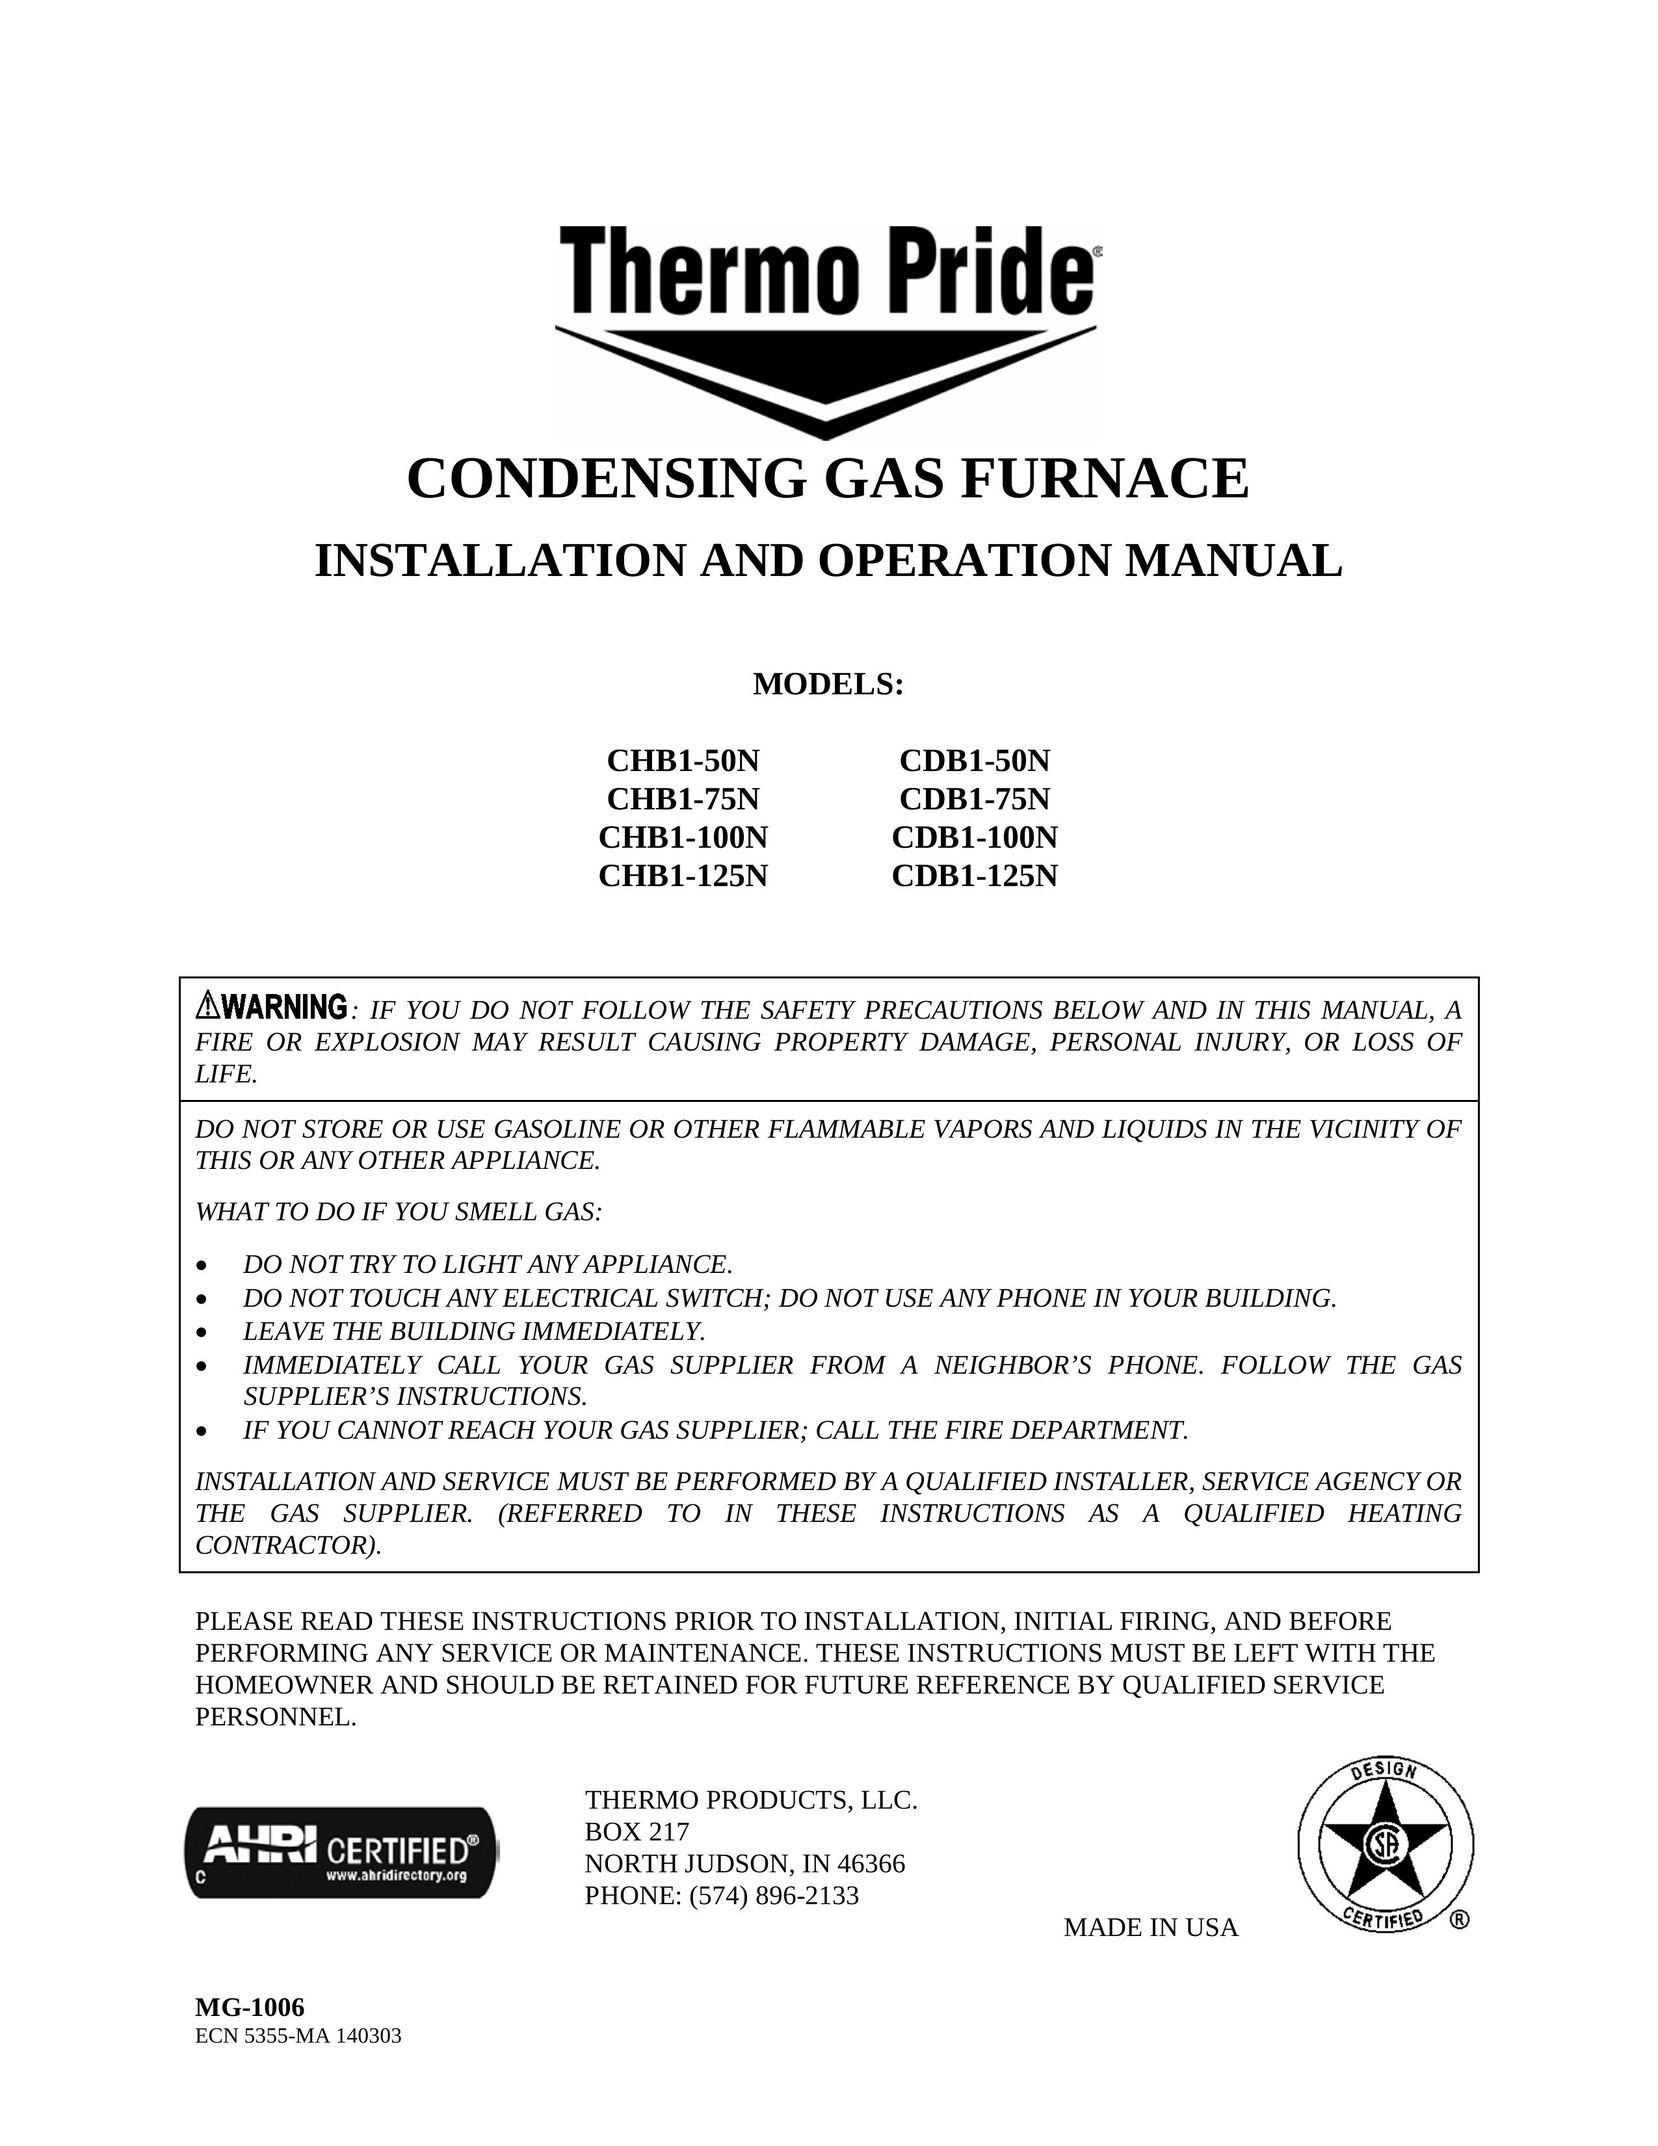 Thermo Products CBD1-50N Furnace User Manual